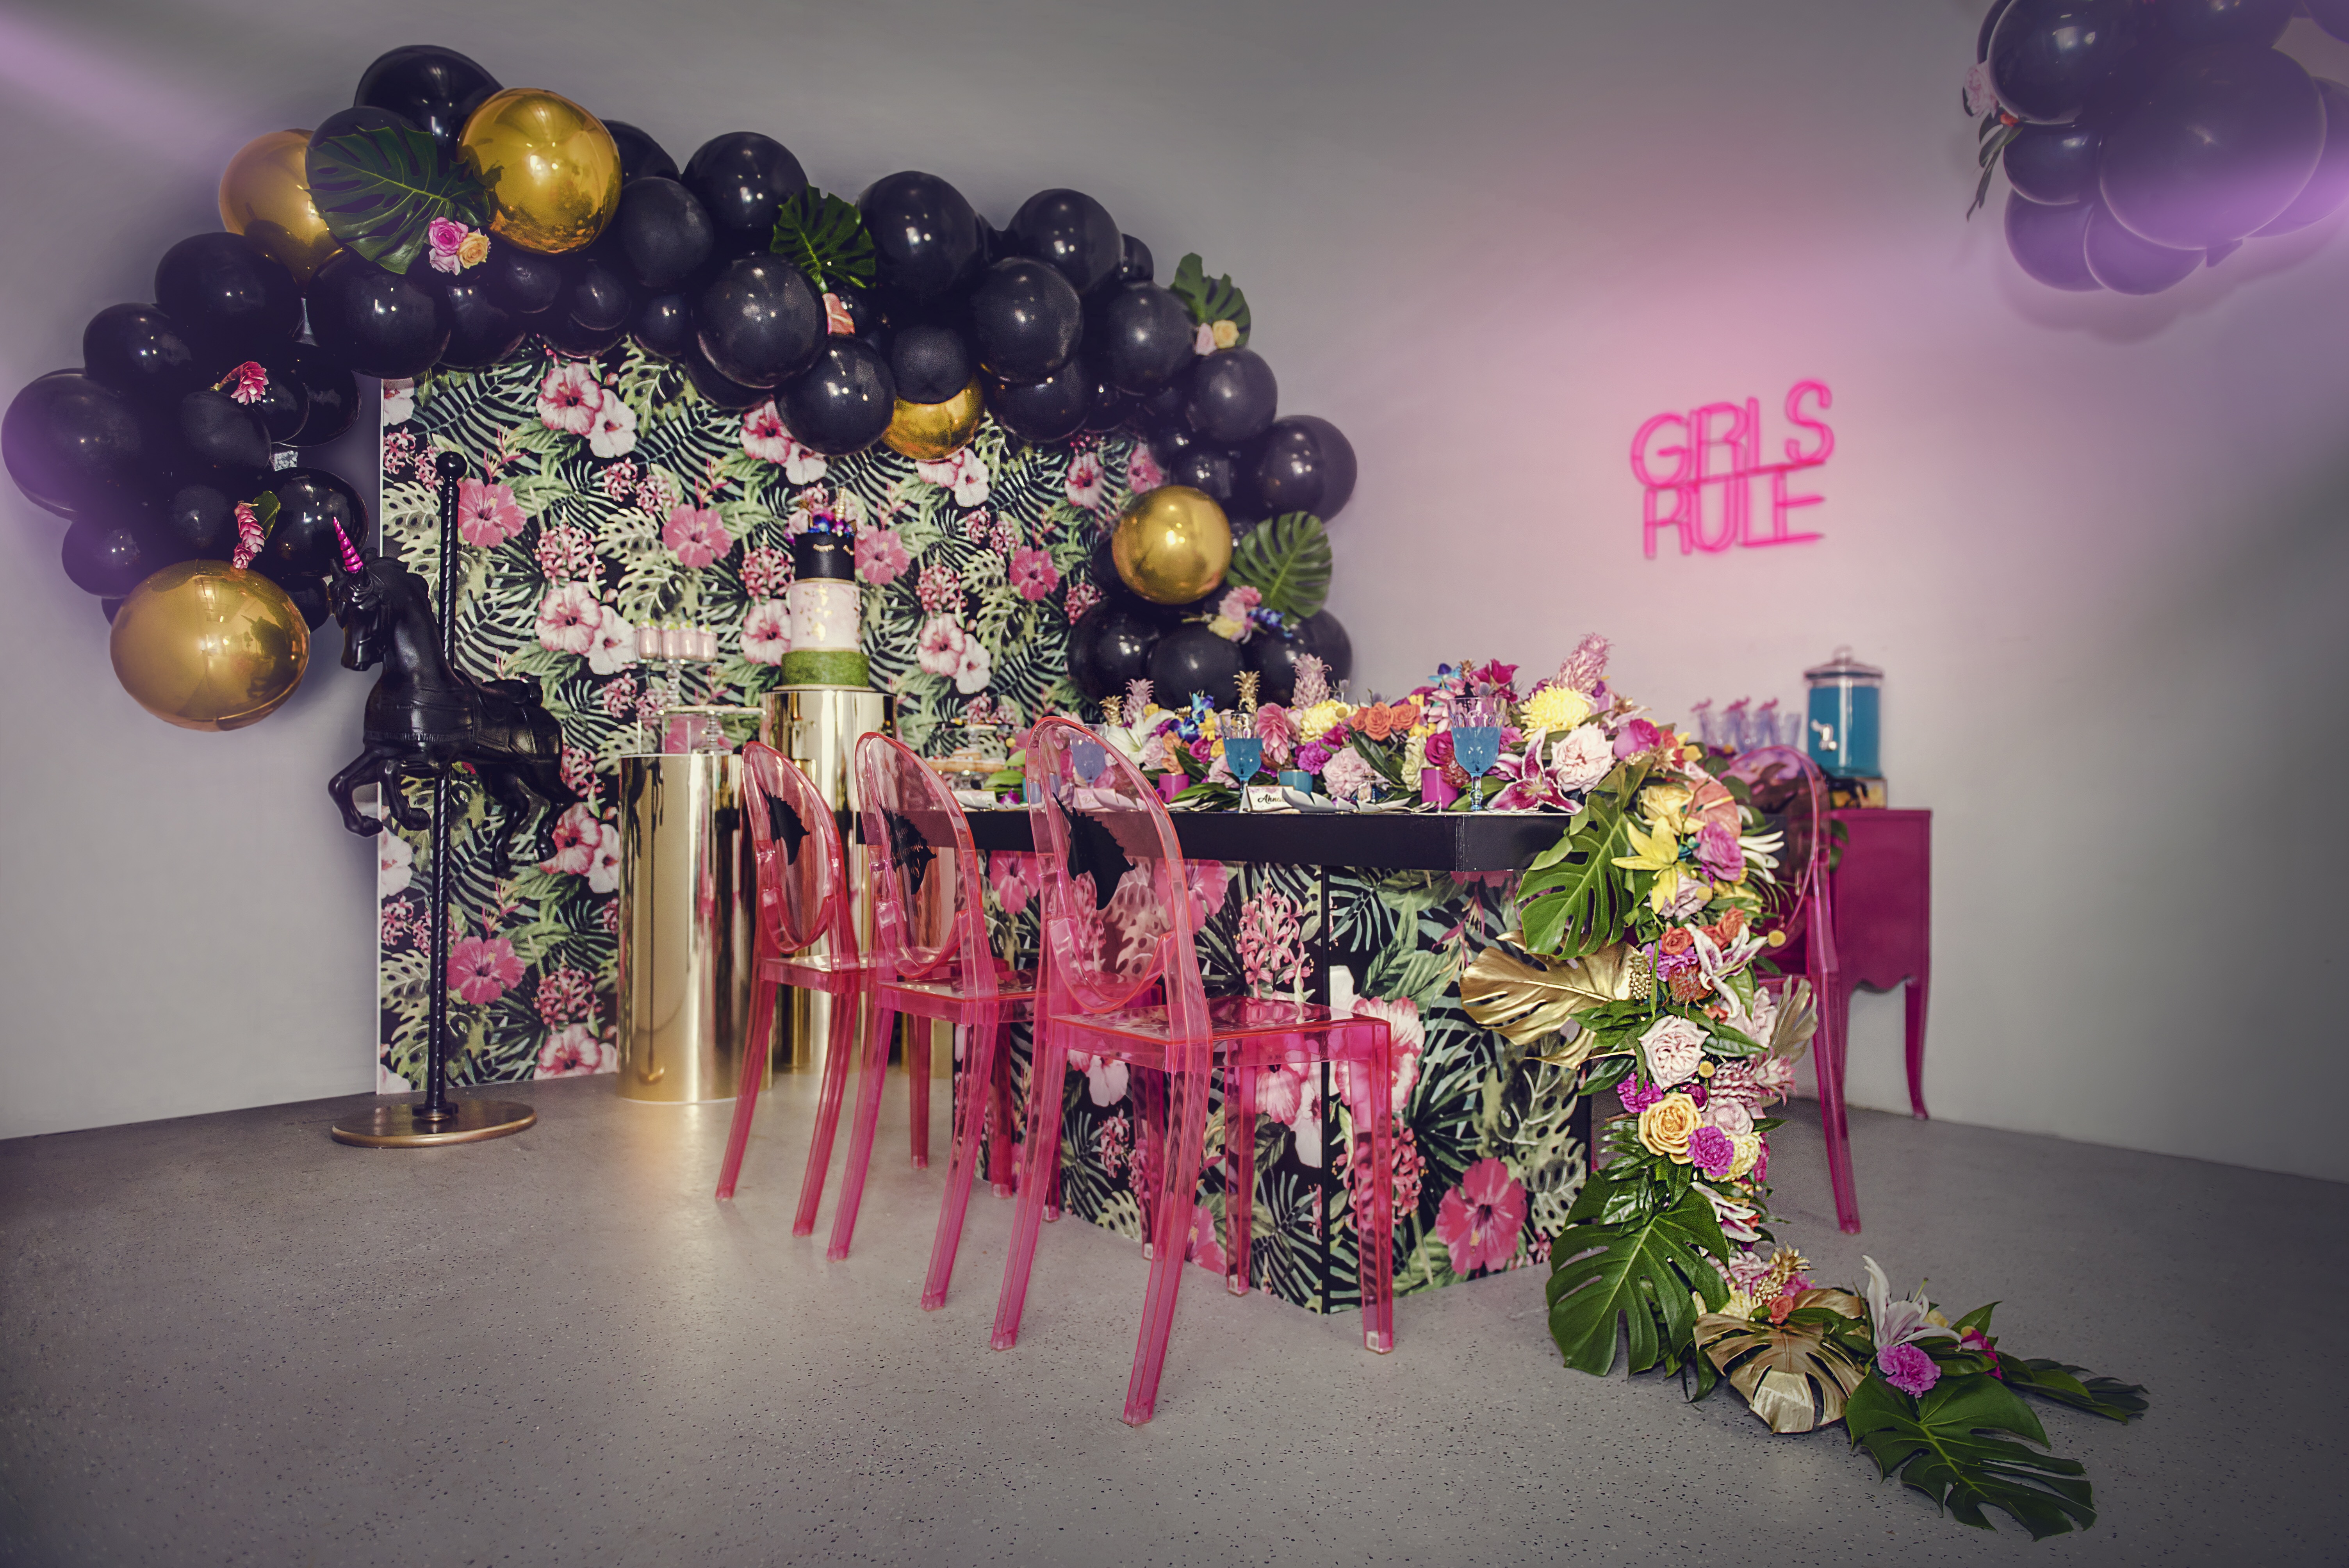 A beautiful space was set up for the party